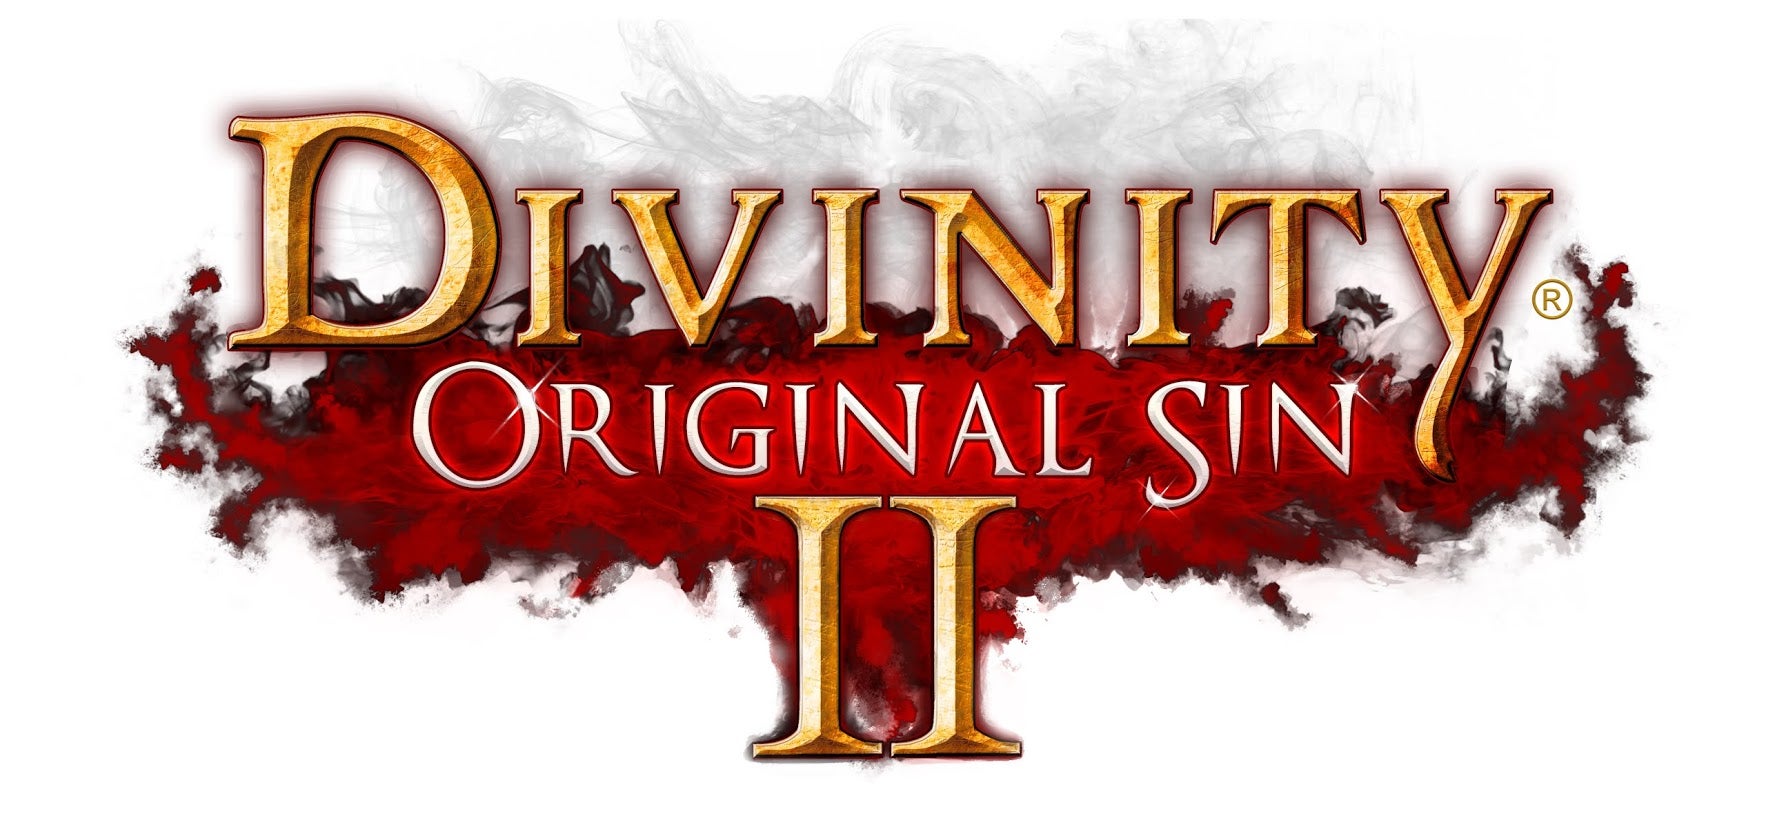 Image for Divinity: Original Sin 2 is coming to Kickstarter and you can vote on the reward tiers